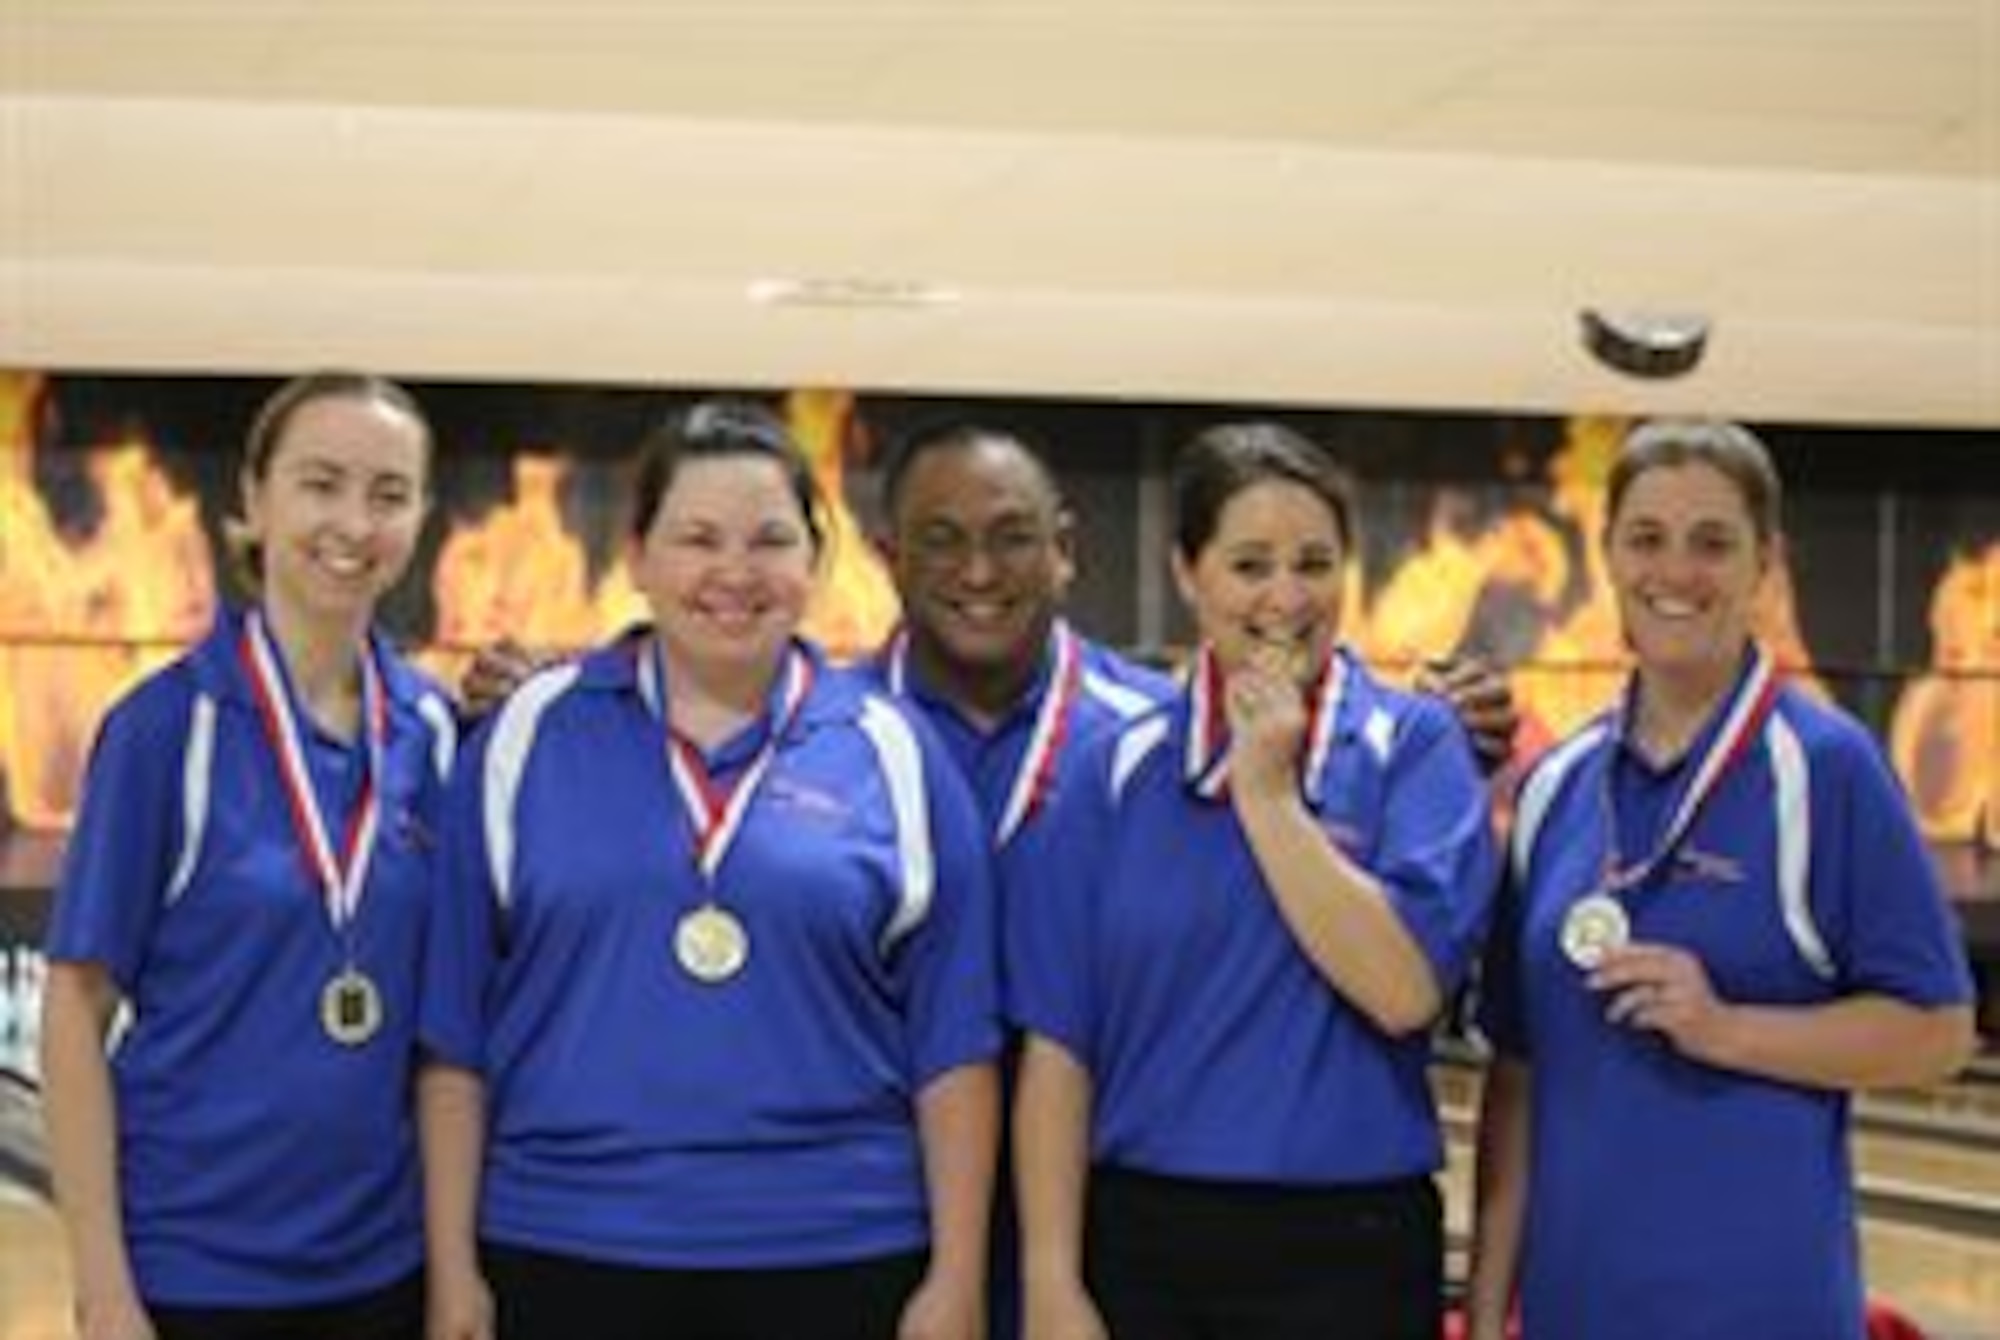 The All-Air Force women's bowling team captured the gold medal in the Armed Forces women's bowling championship in Camp Pendleton, California.